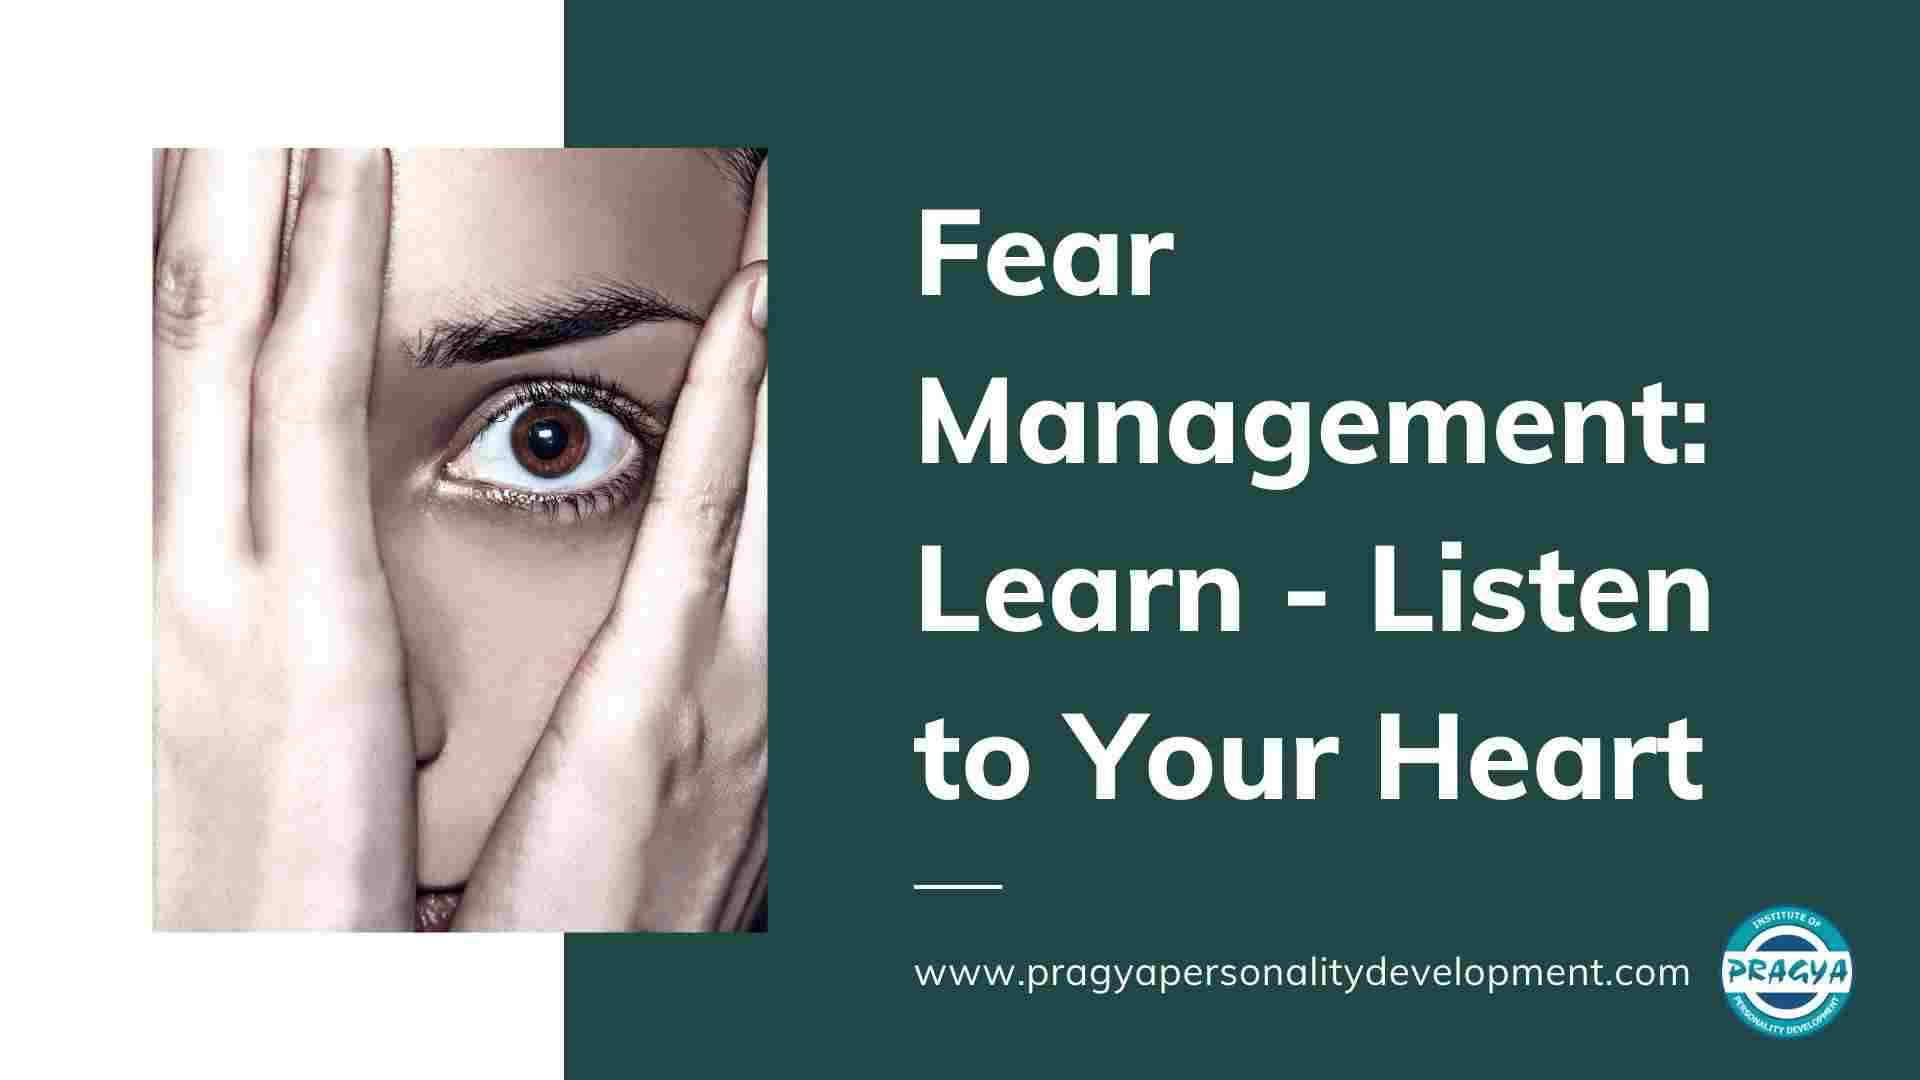 Fear Management: Learn - Listen to Your Heart